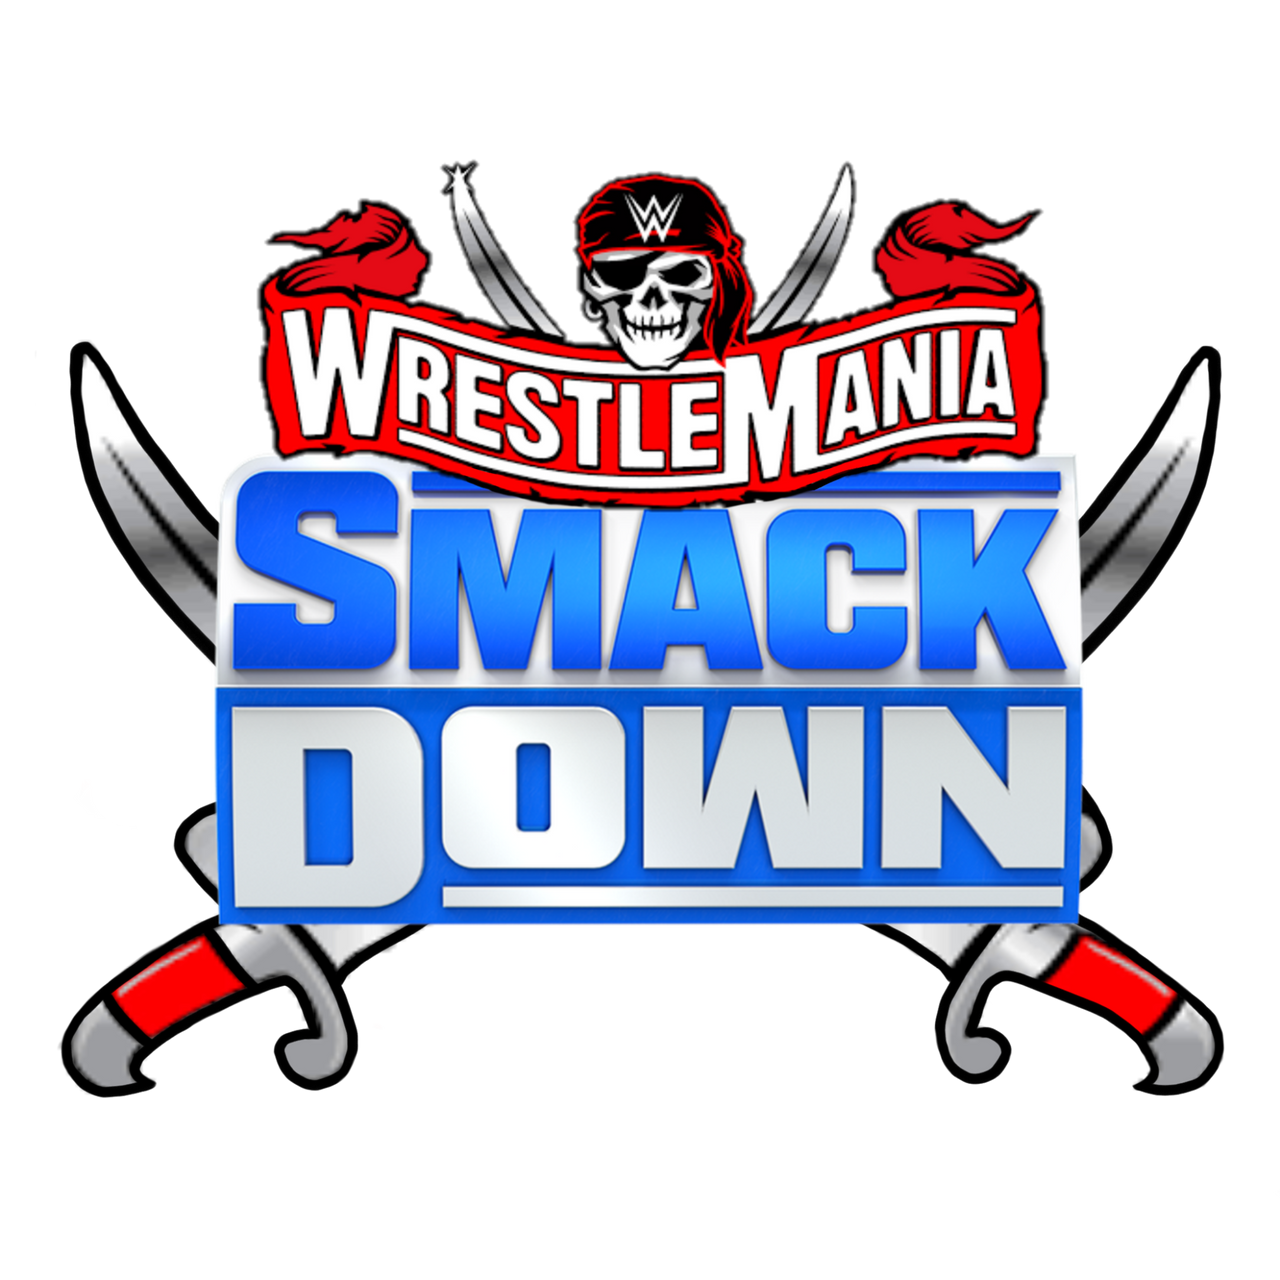 Wwe Wrestlemania Edition Smackdown Logo Png 21 By Chxzzyb On Deviantart